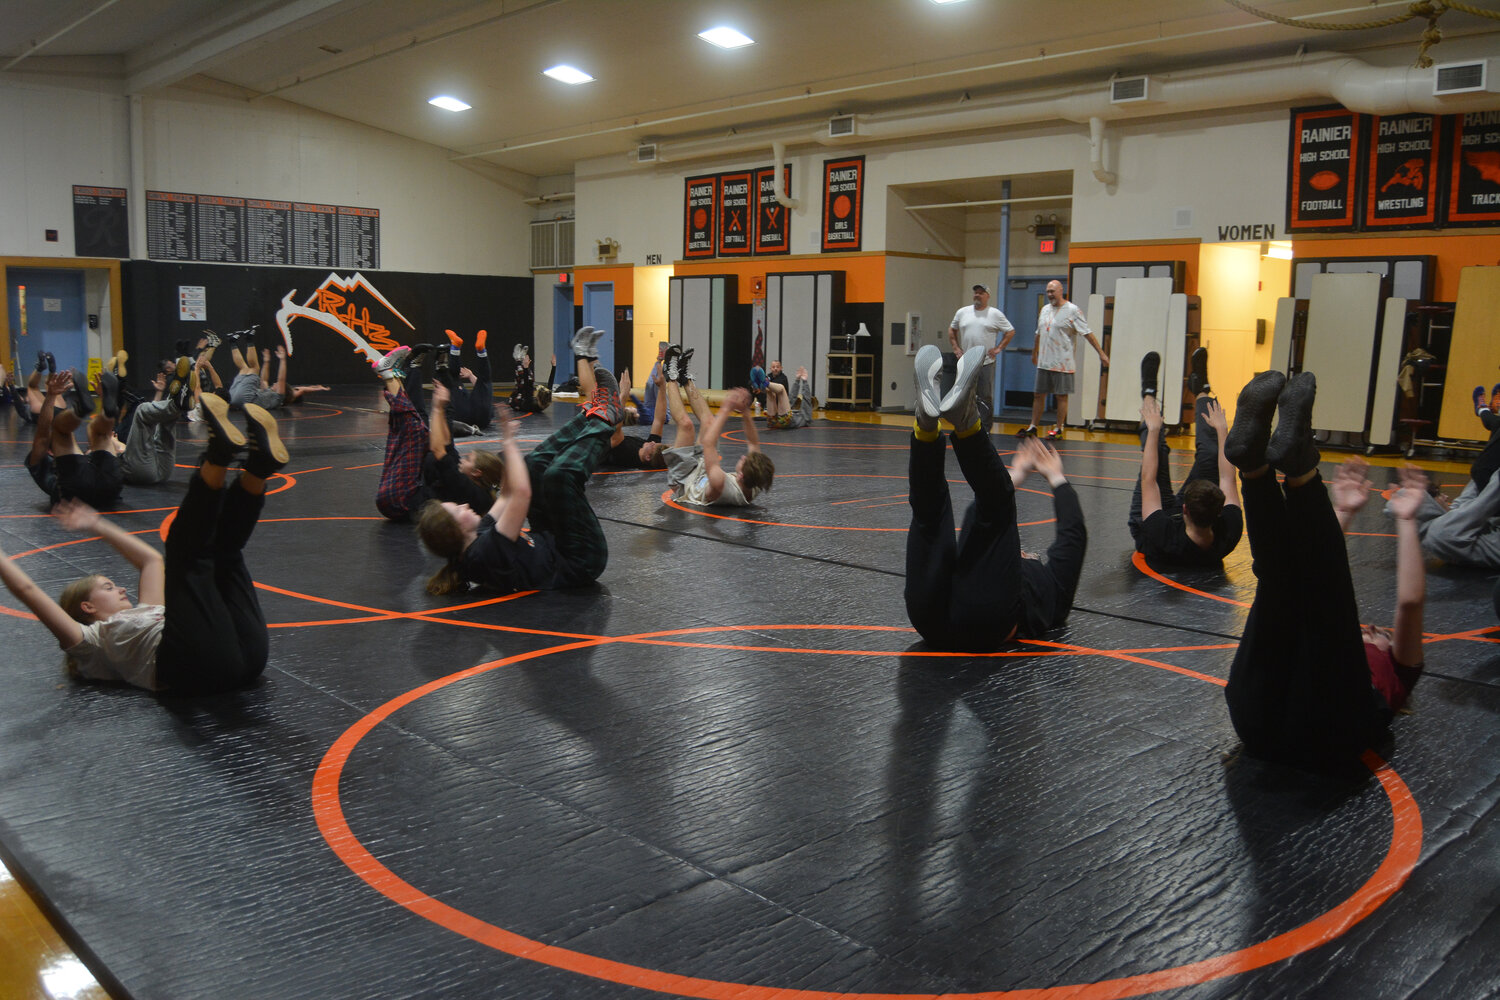 Chris Holterman and the Rainier wrestling coaches lead the team through a practice on Nov. 30.